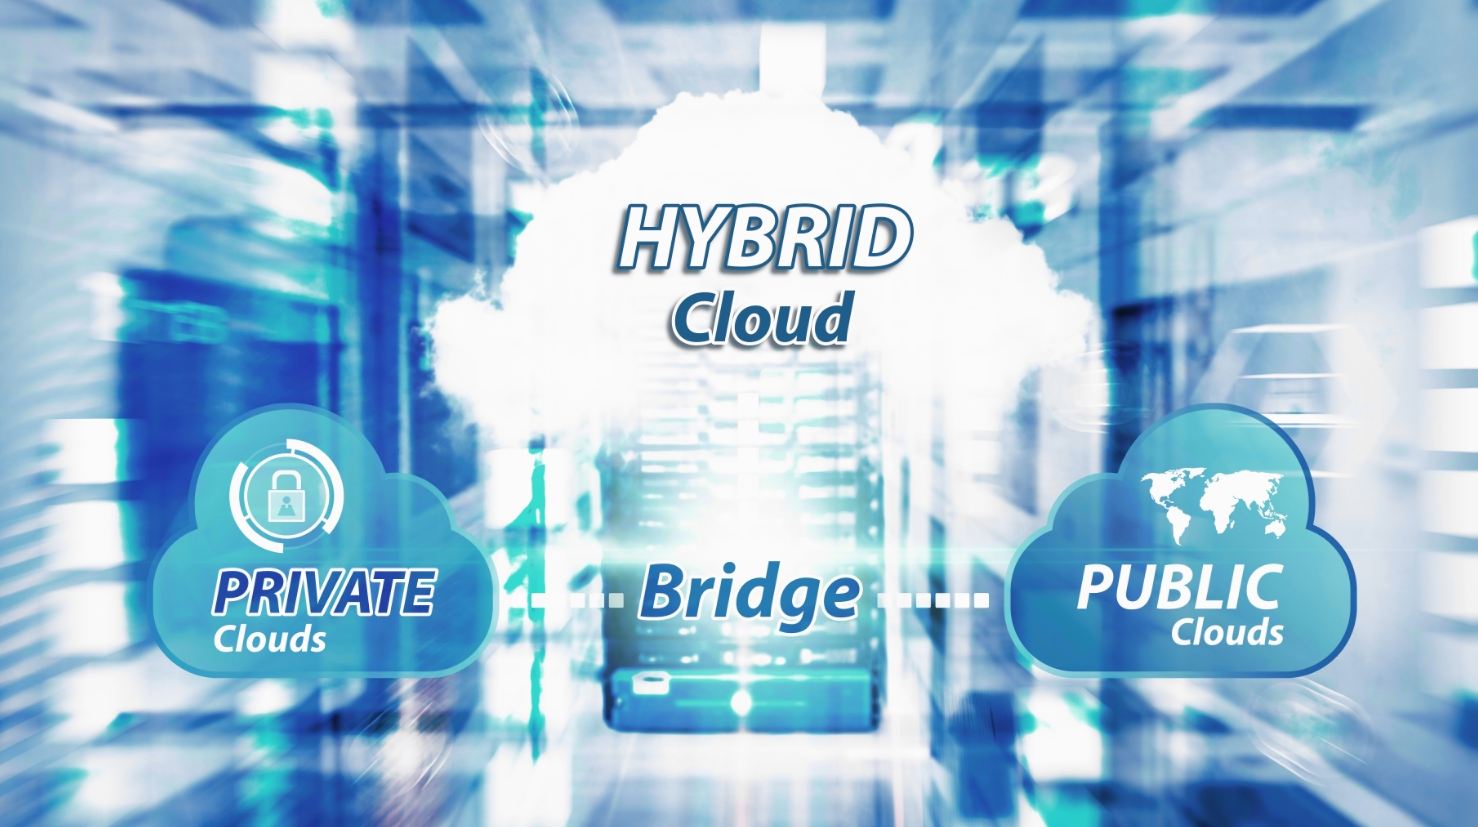 Hybrid Cloud Security Solutions for Small Business